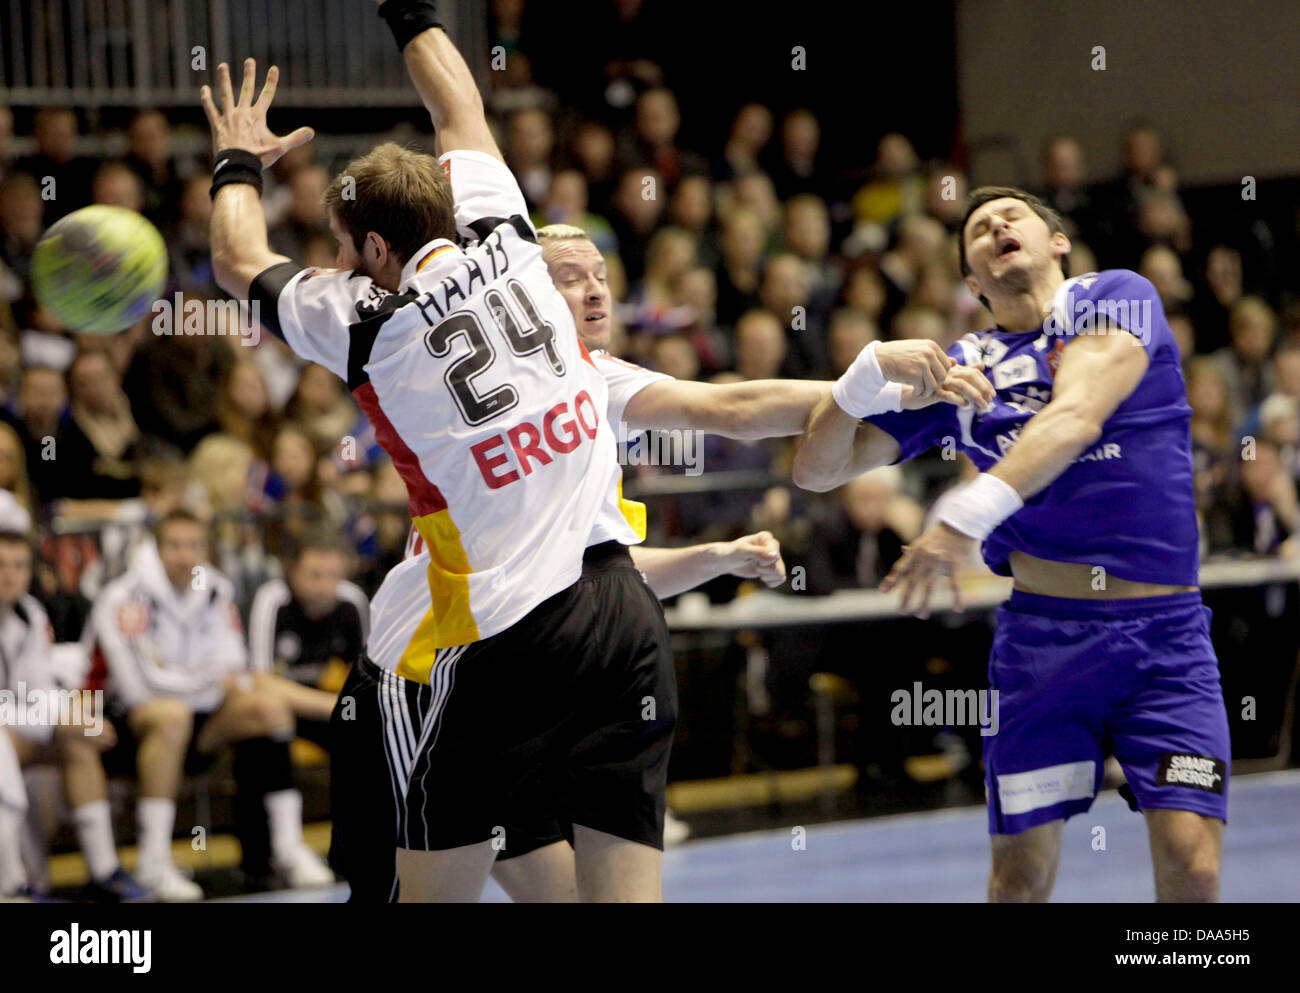 Germany's Michael Haass (l) and Pascal Hens  tackle Iceland's Alexander Peterson (r) during a handball match of Germany versus Iceland in Reykjavik, Iceland, 8 January 2011. Photo: Halldor Kolbeins Stock Photo